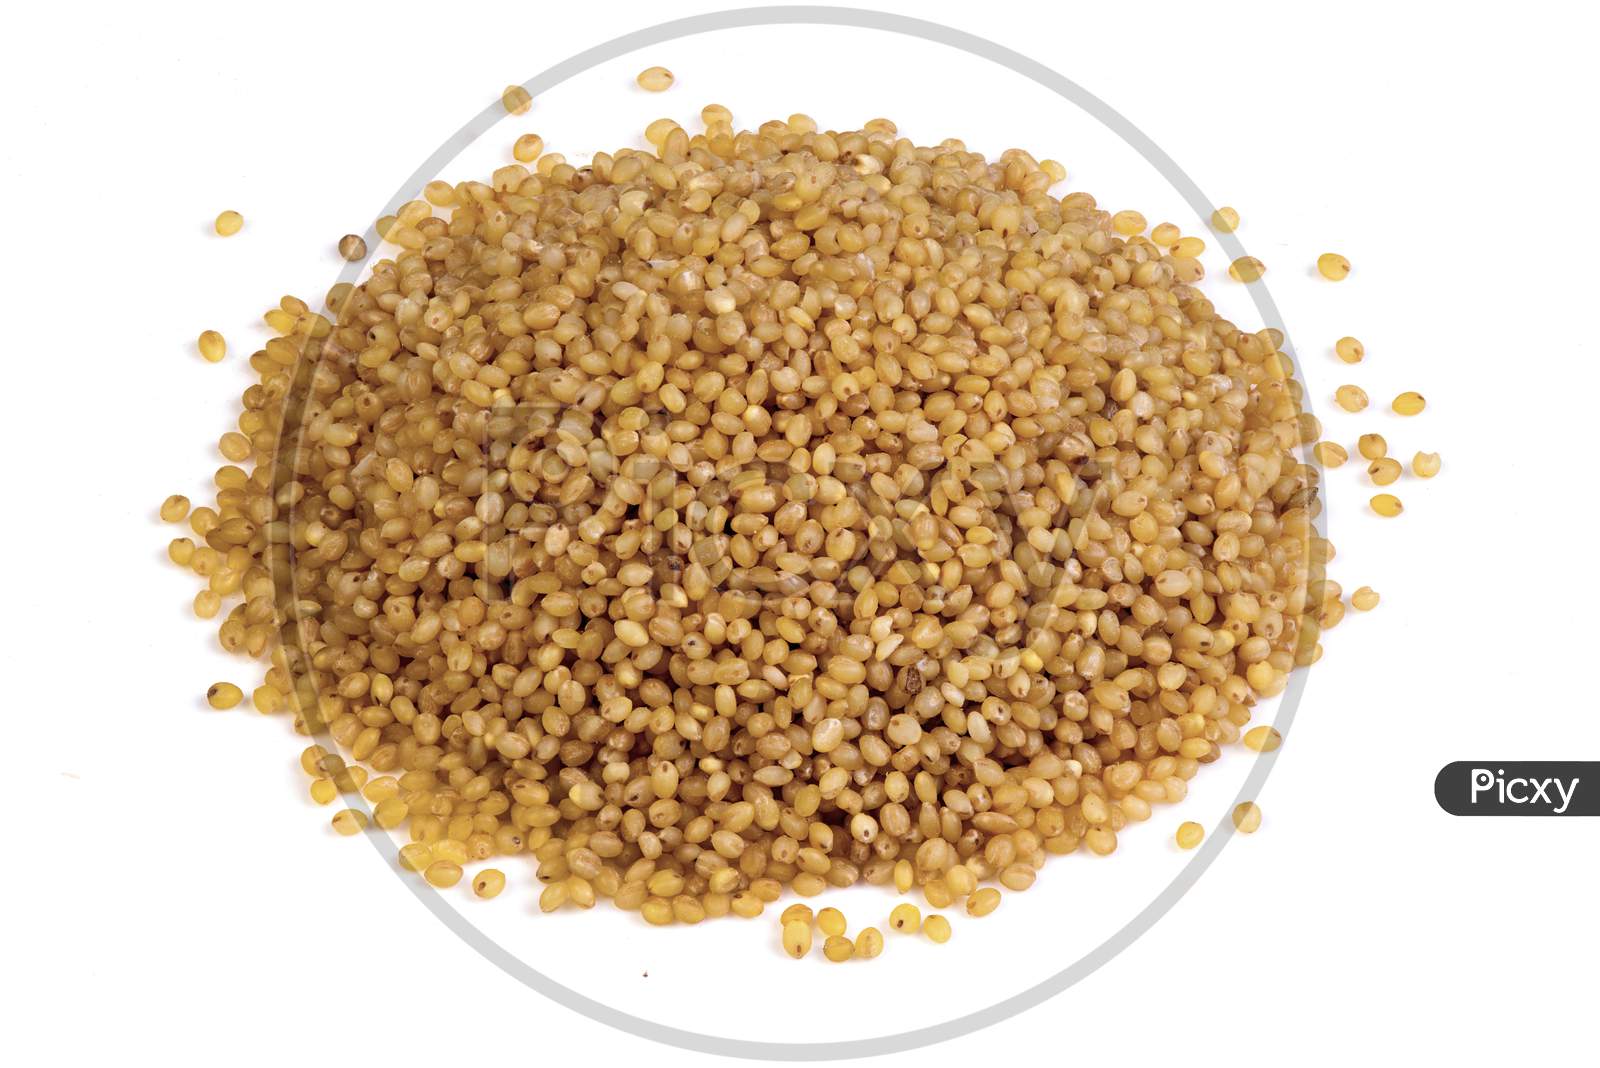 Foxtail Millet Against A White Background, Isolated